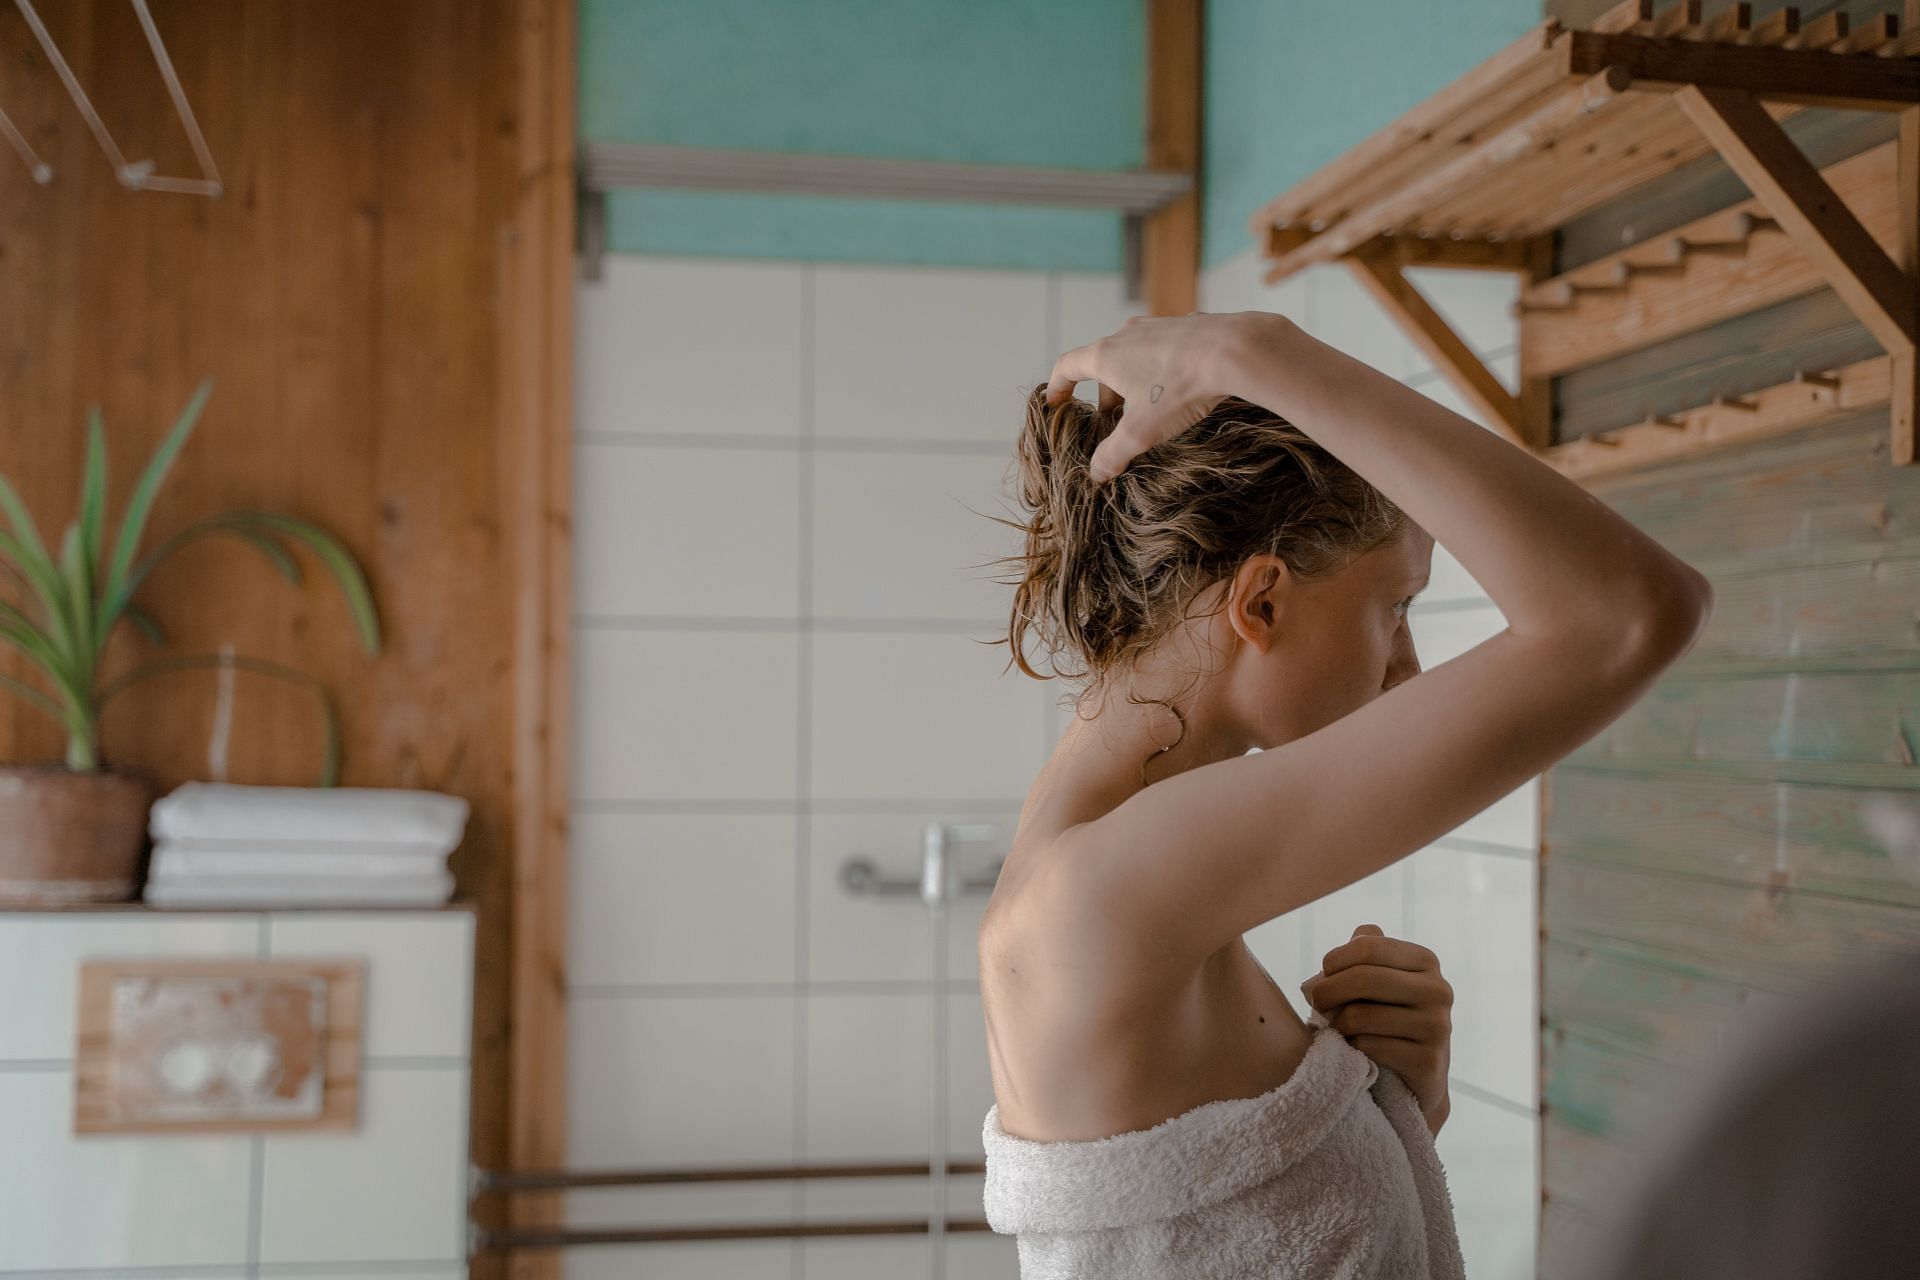 Itchy skin after shower (Image via Pexels/Ron Lach)